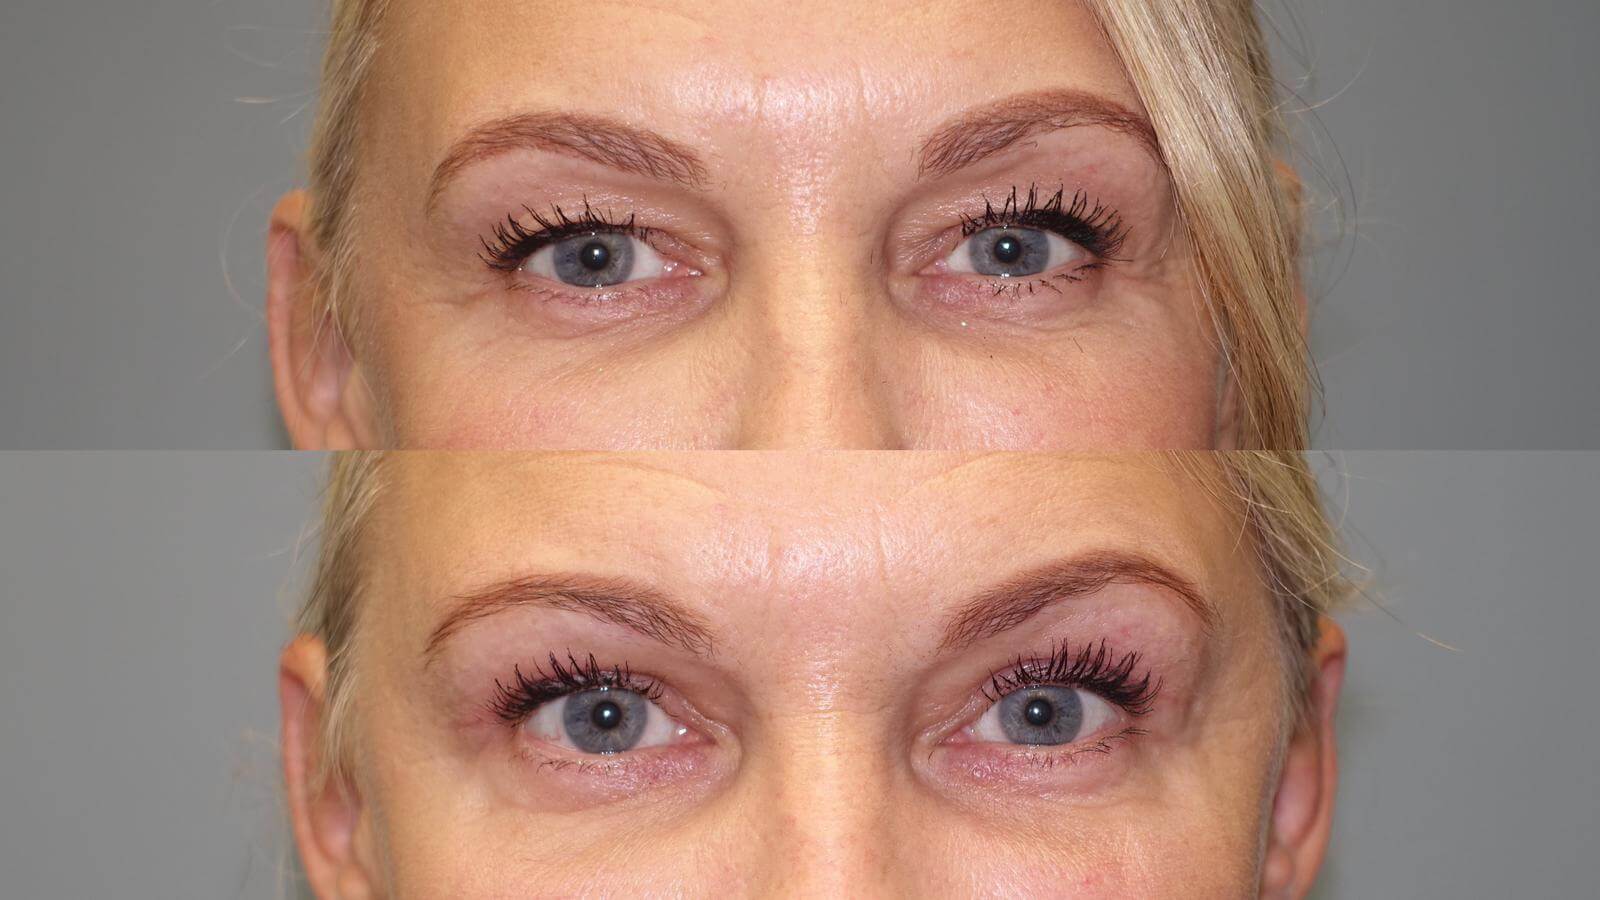 Before and After Eyelid lift -this corrected facial asymmetry caused by droopy upper eyelids. Look at the left versus the right eye on the before picture. The result speaks for itself